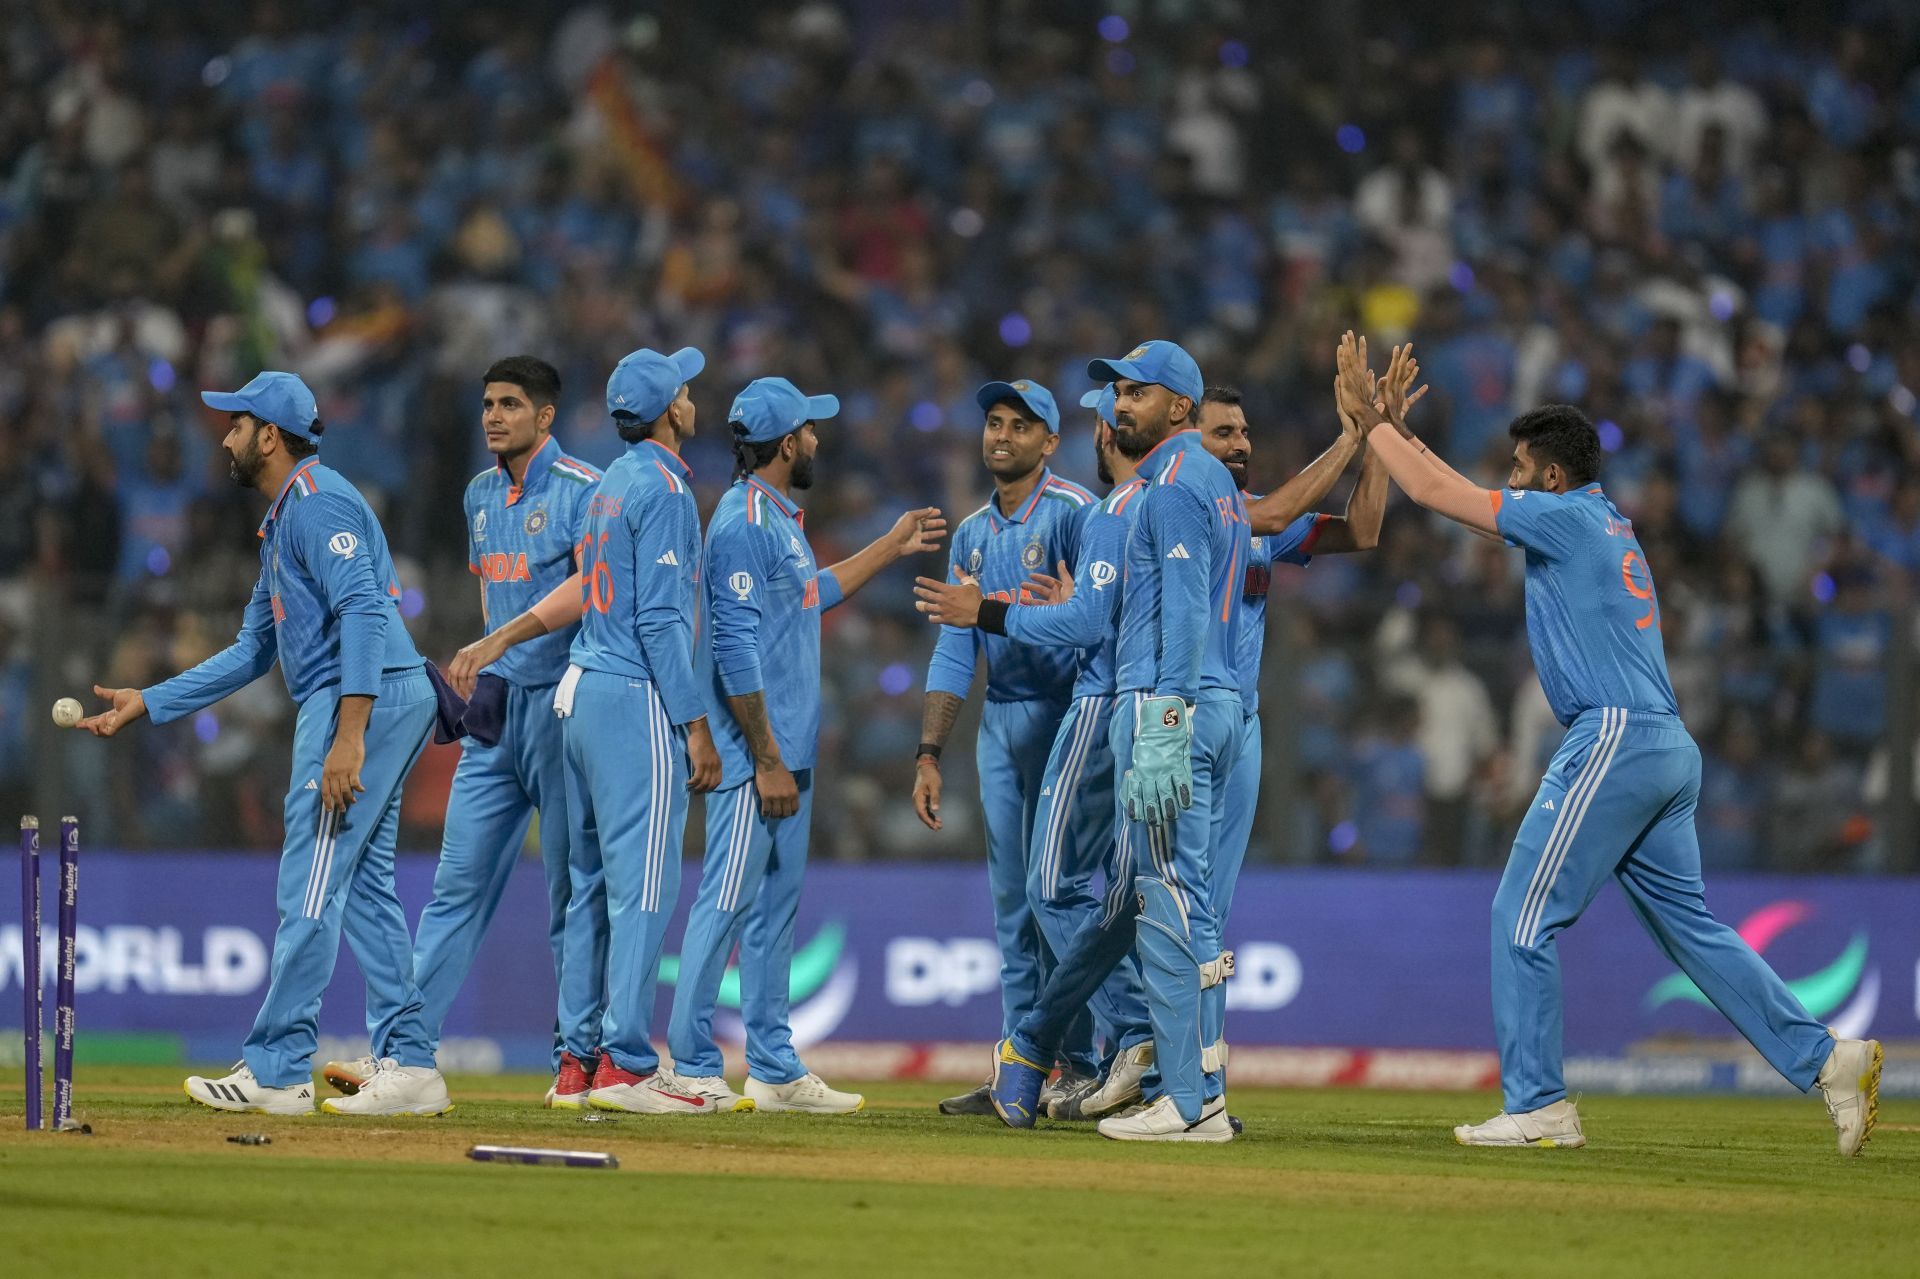 India have registered convincing wins in all their seven games. [P/C: AP]